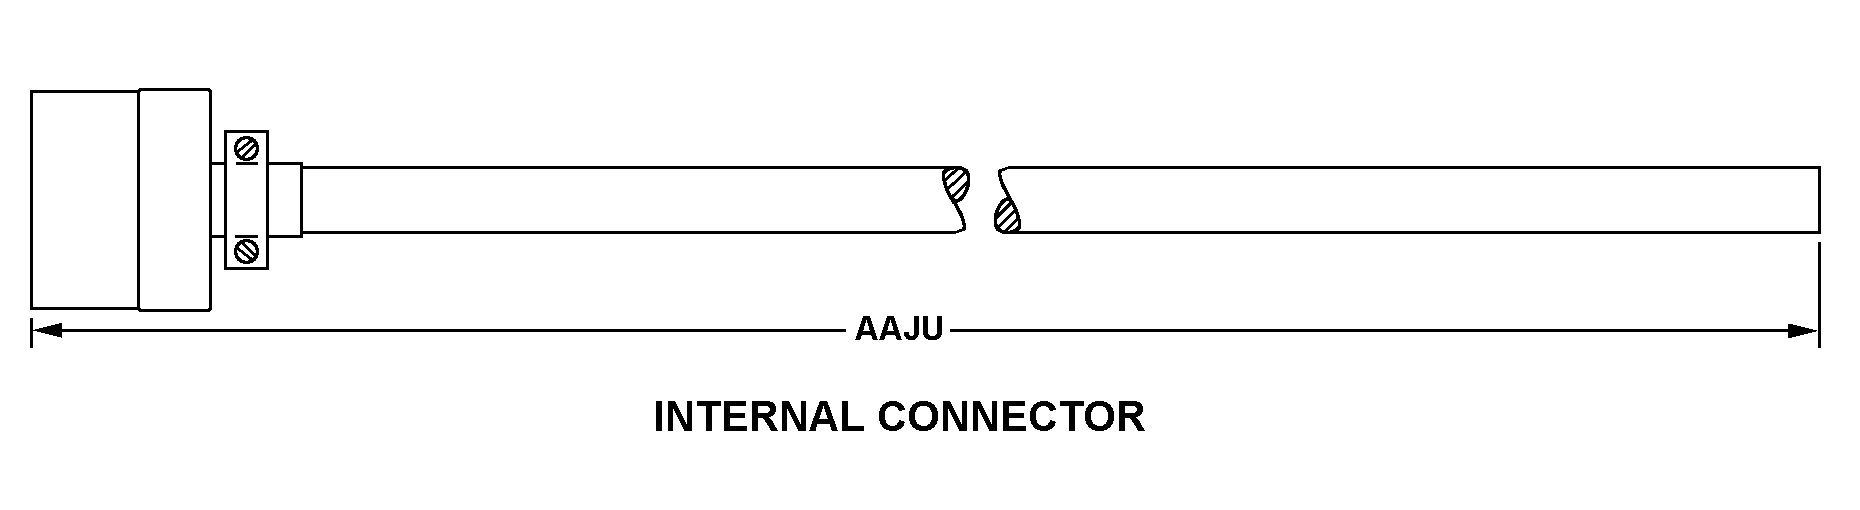 INTERNAL CONNECTOR style nsn 5995-01-246-1491